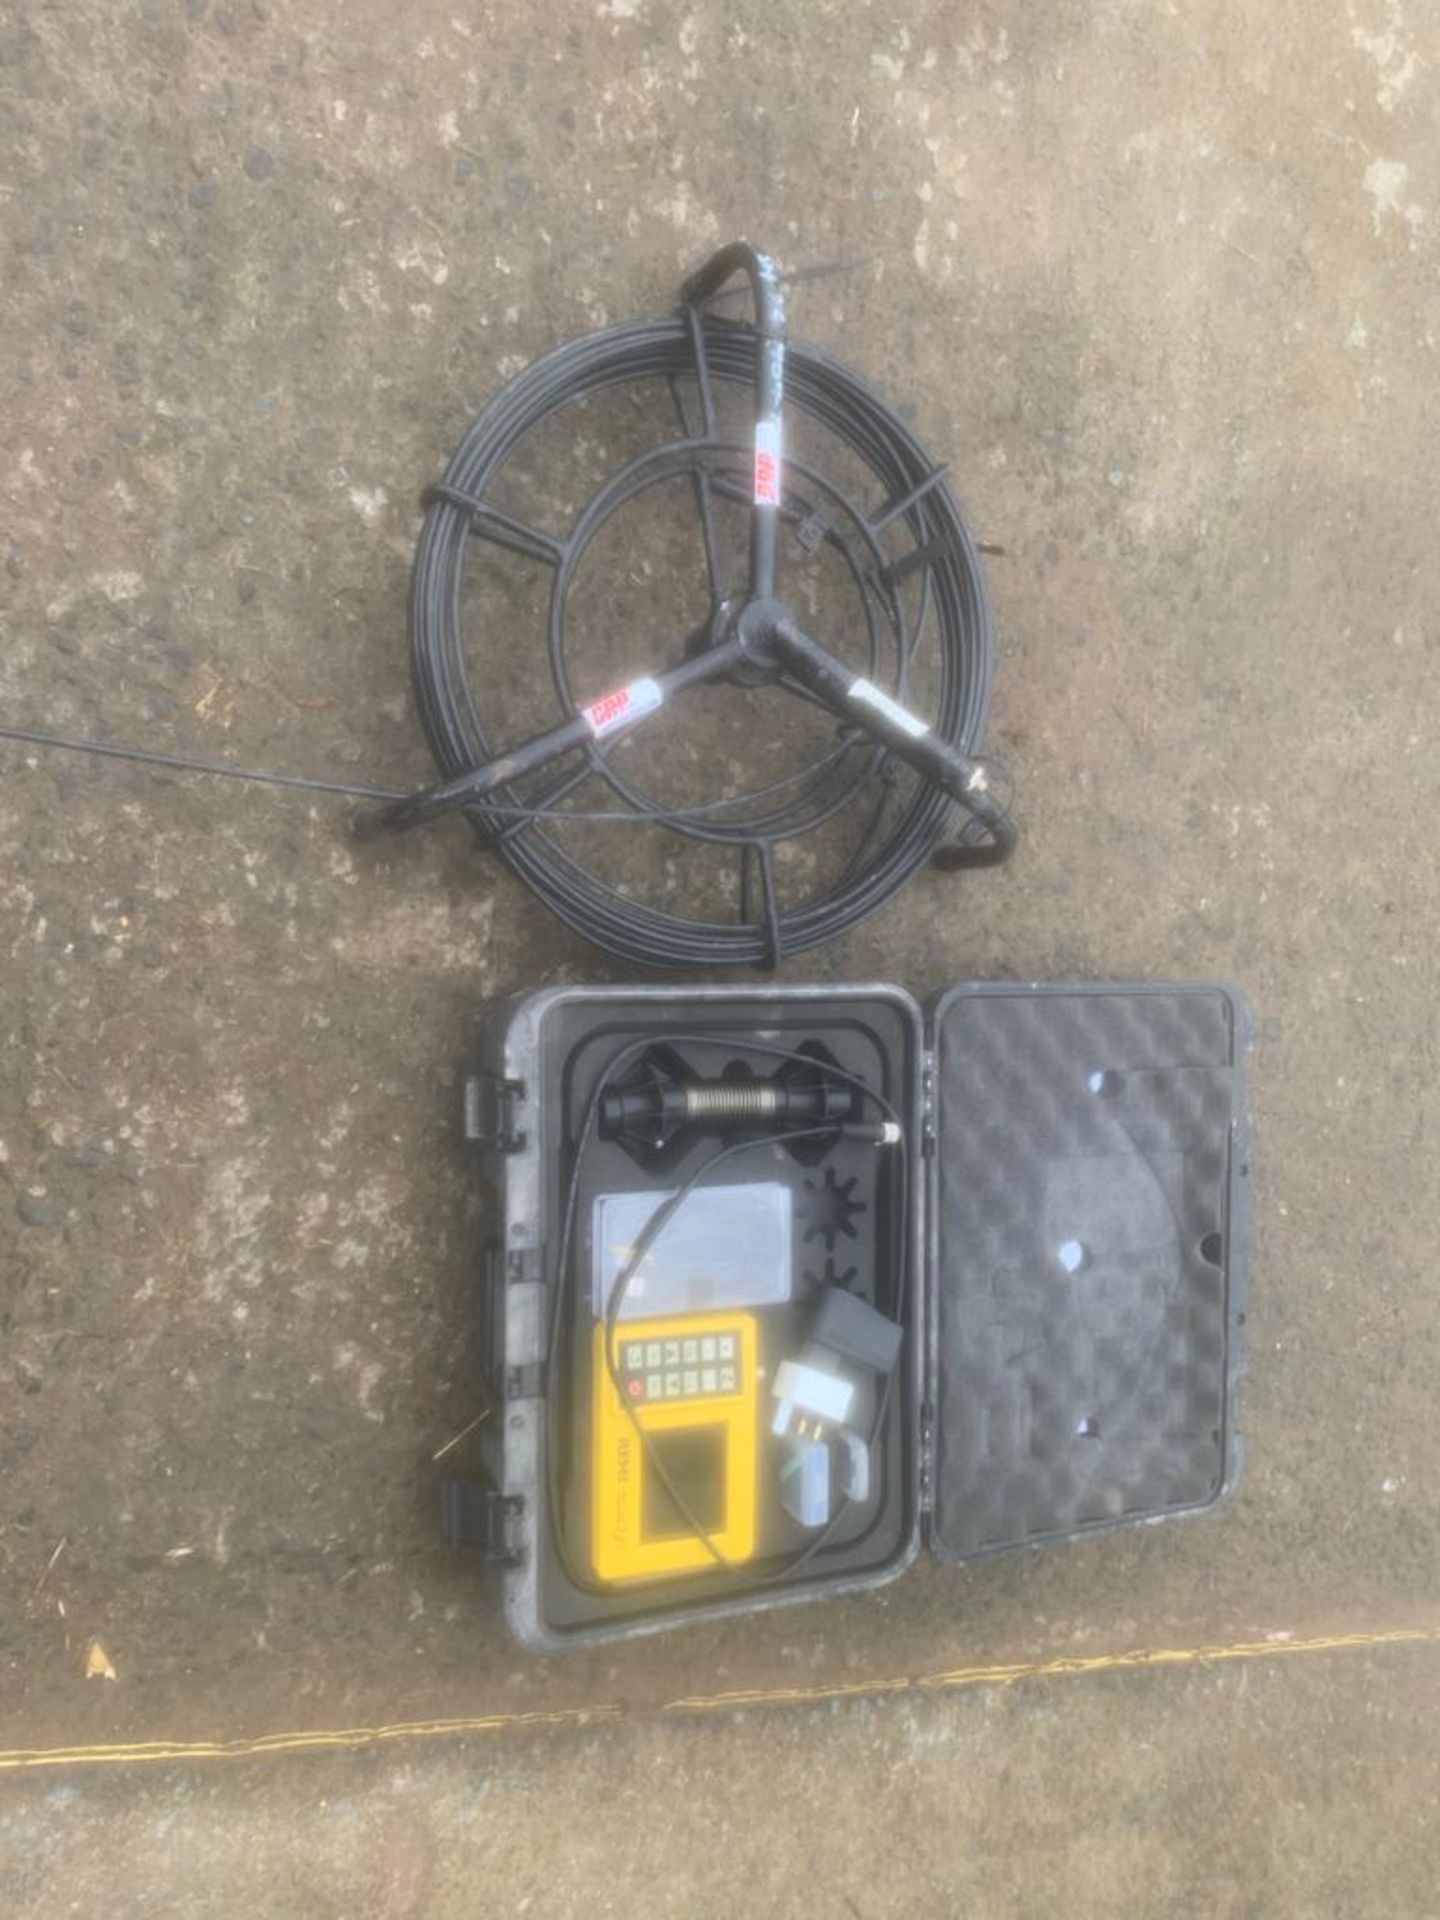 Drain Inspection Reel - Image 2 of 3